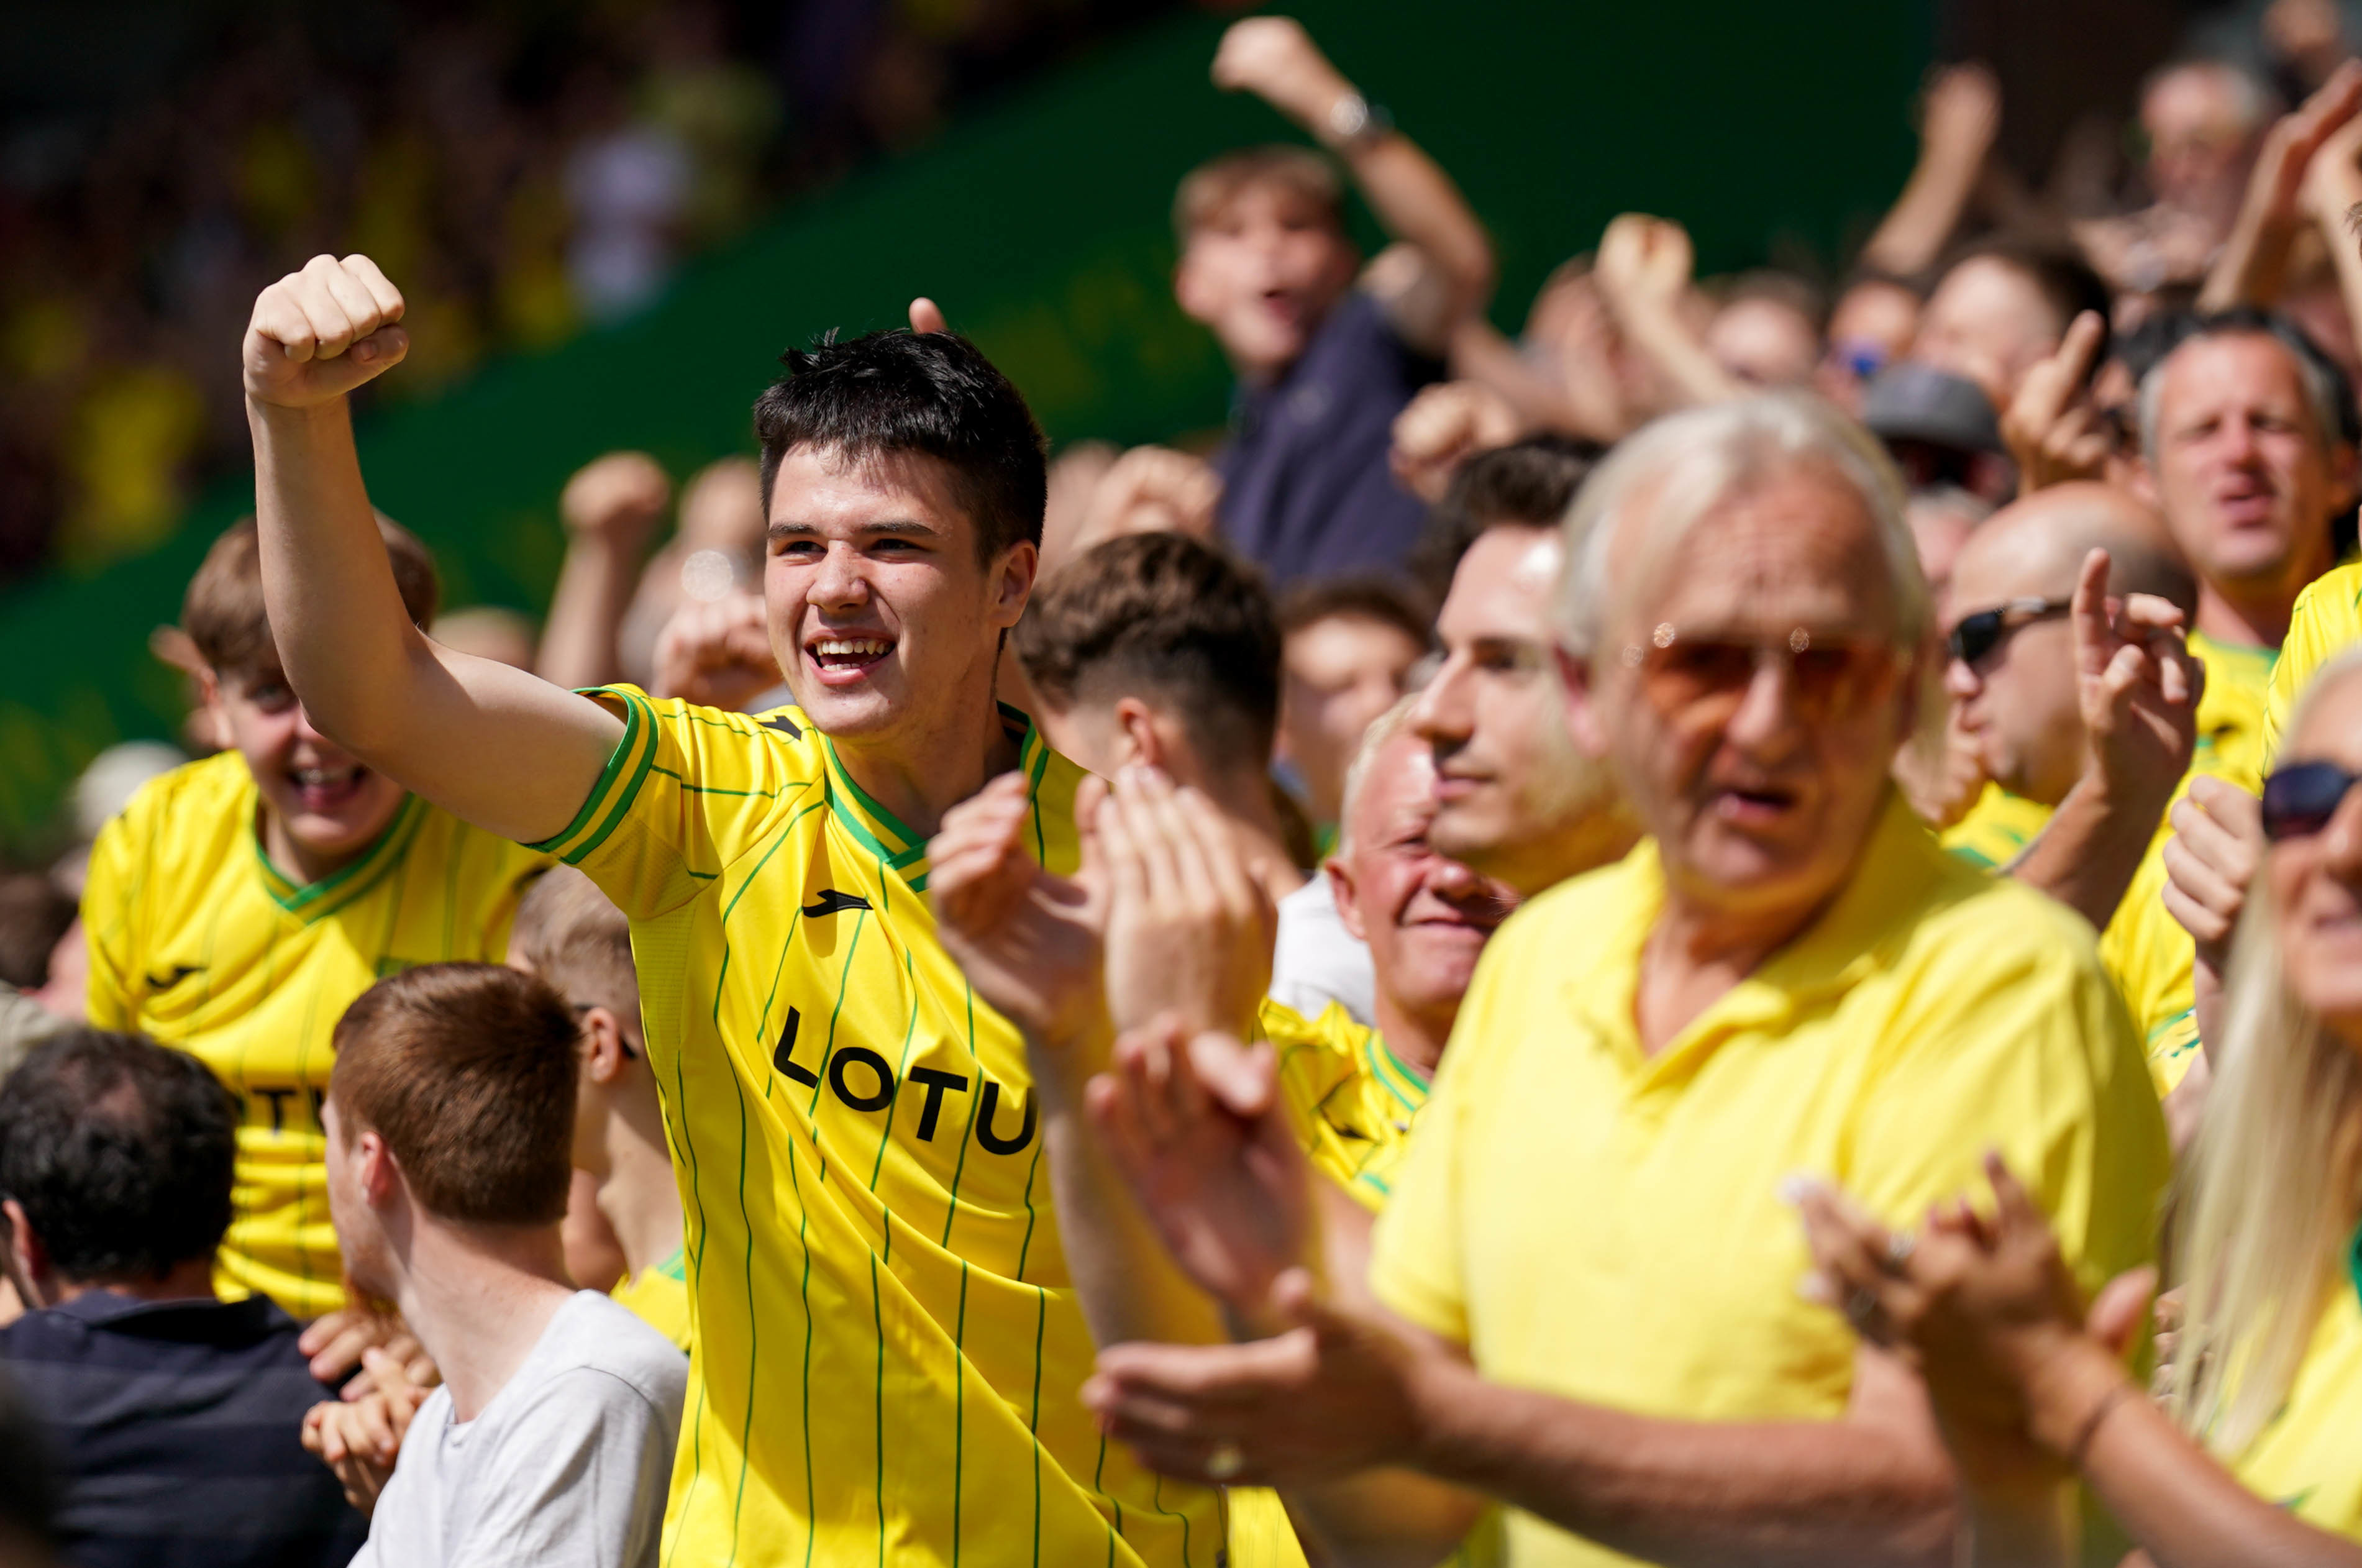 Norwich have banned under-twos from attending matches